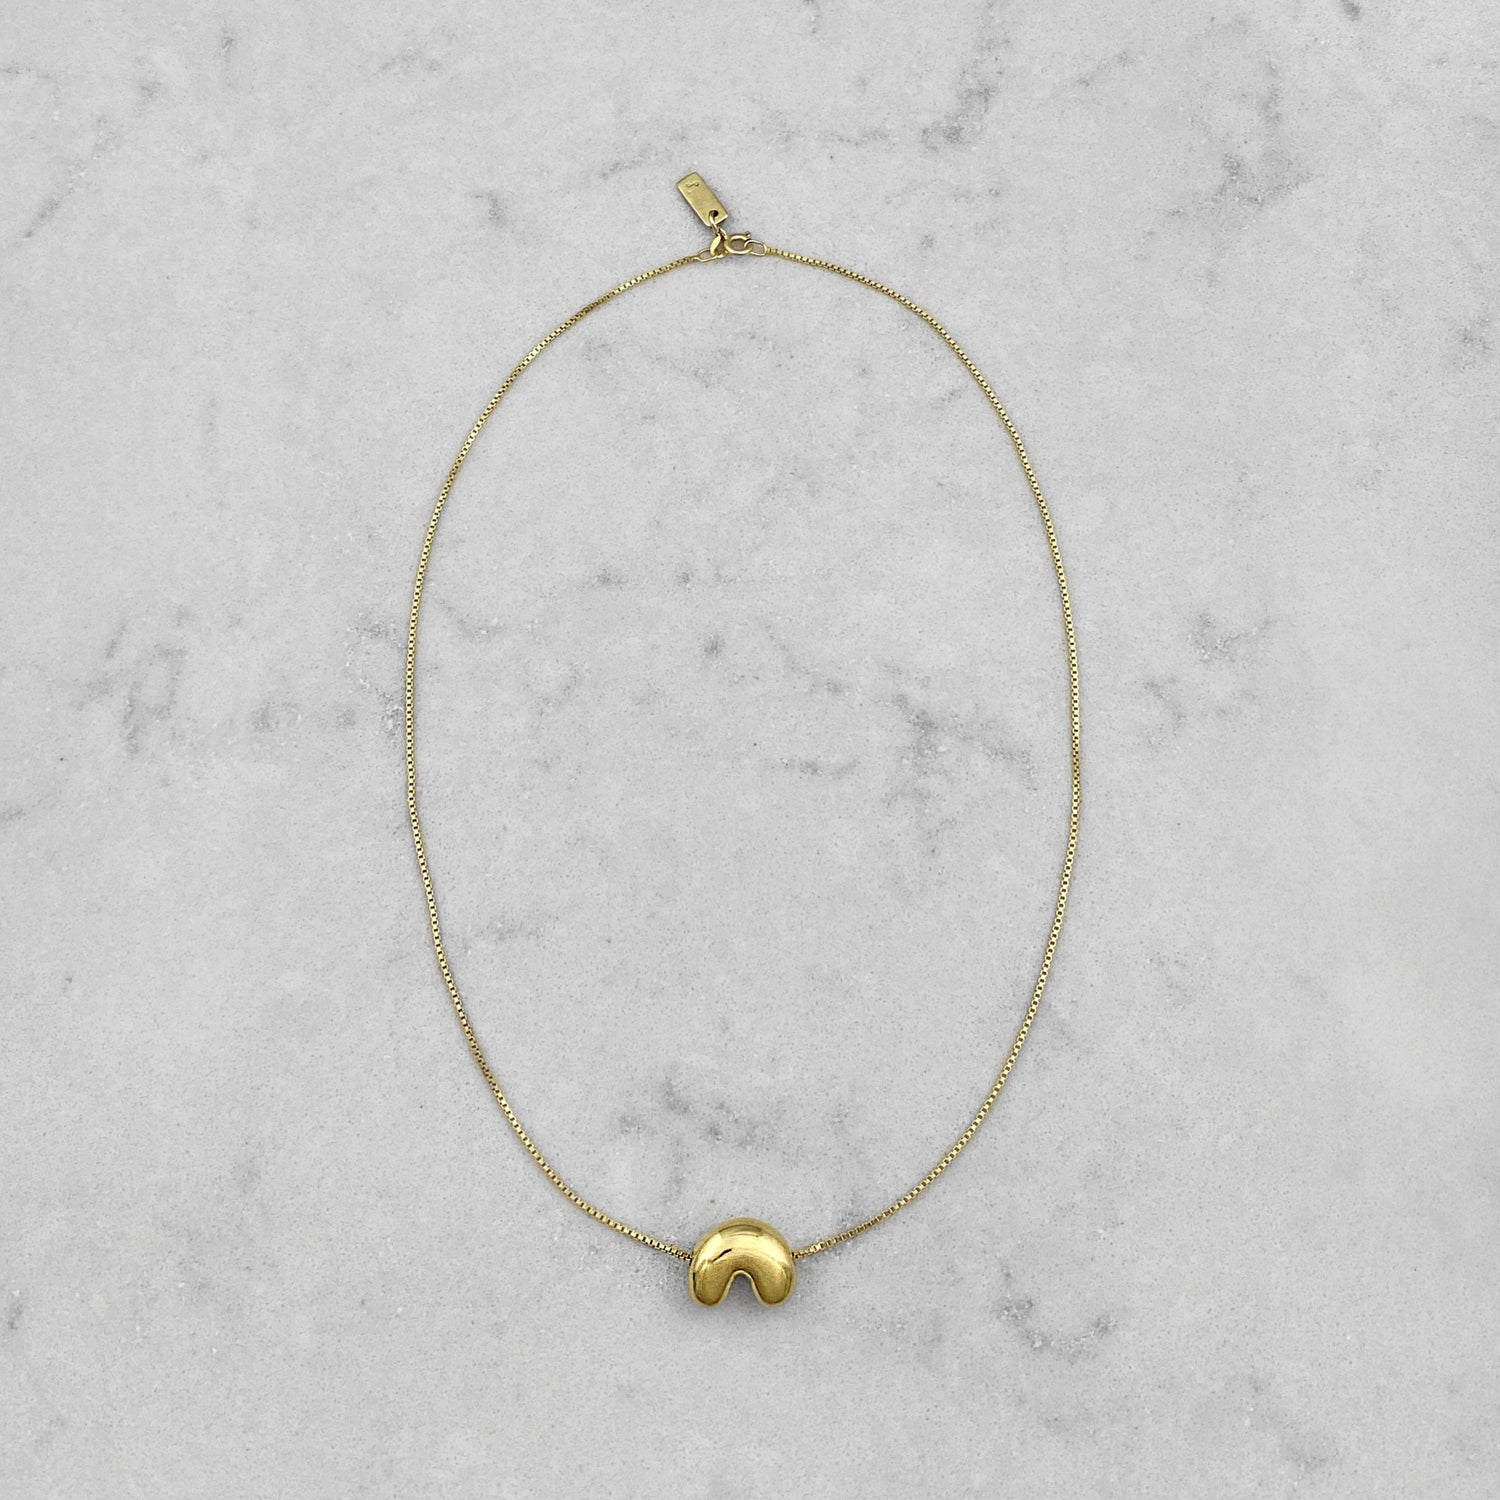 Product photo of a gold necklace by Aur Studio. On a marble plate